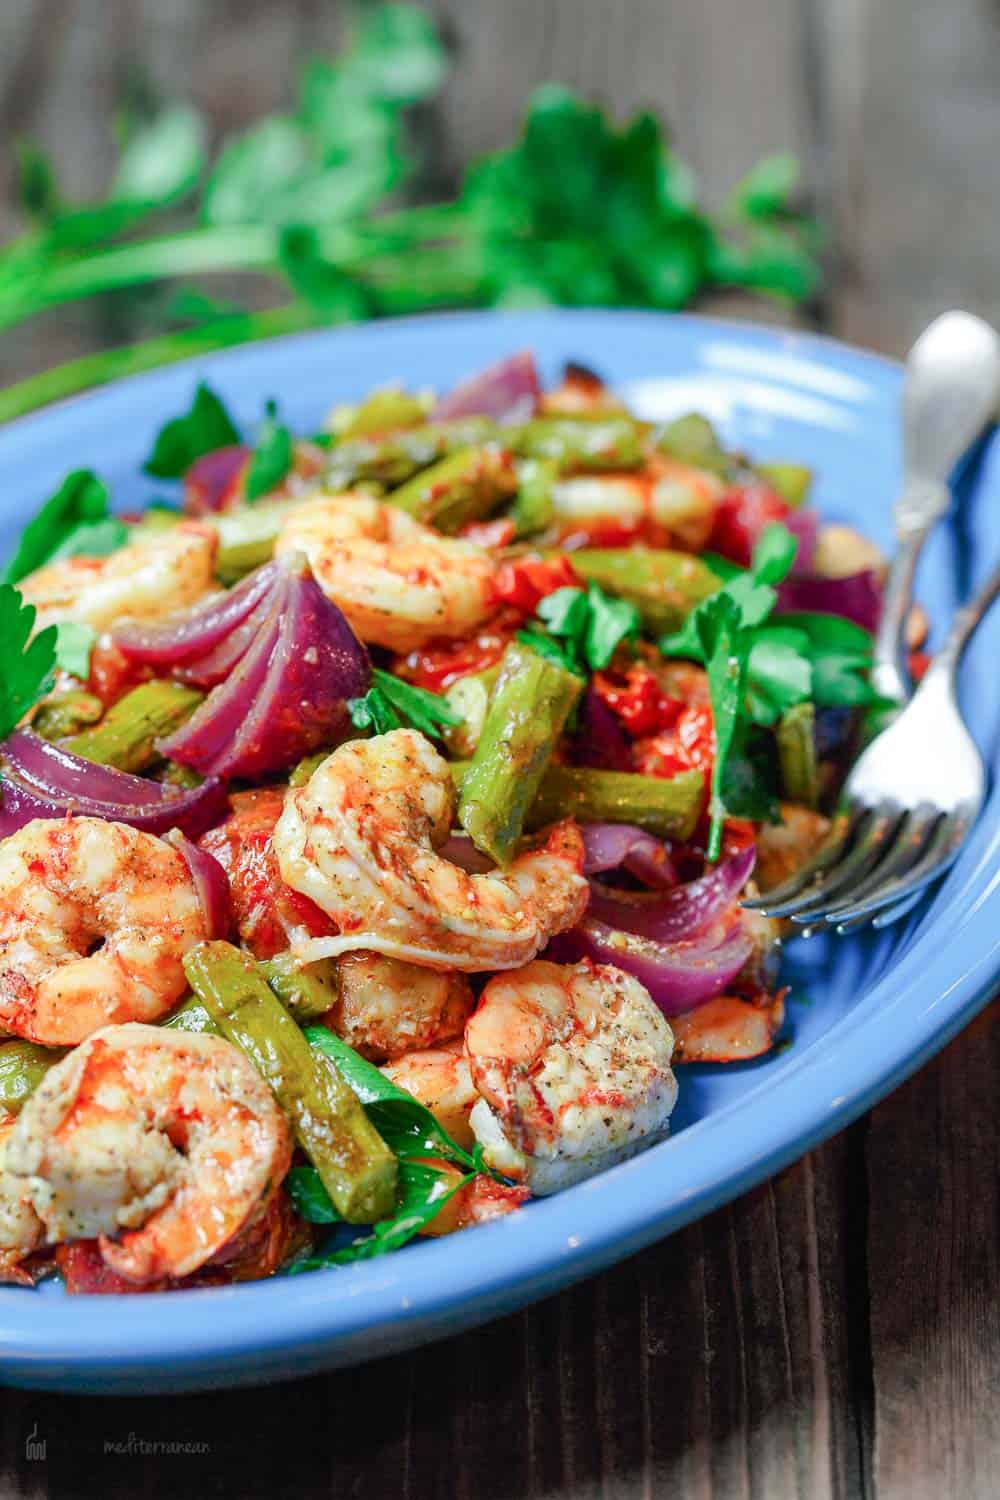 Baked shrimp with Mediterranean flavors and healthy veggies served on a dish